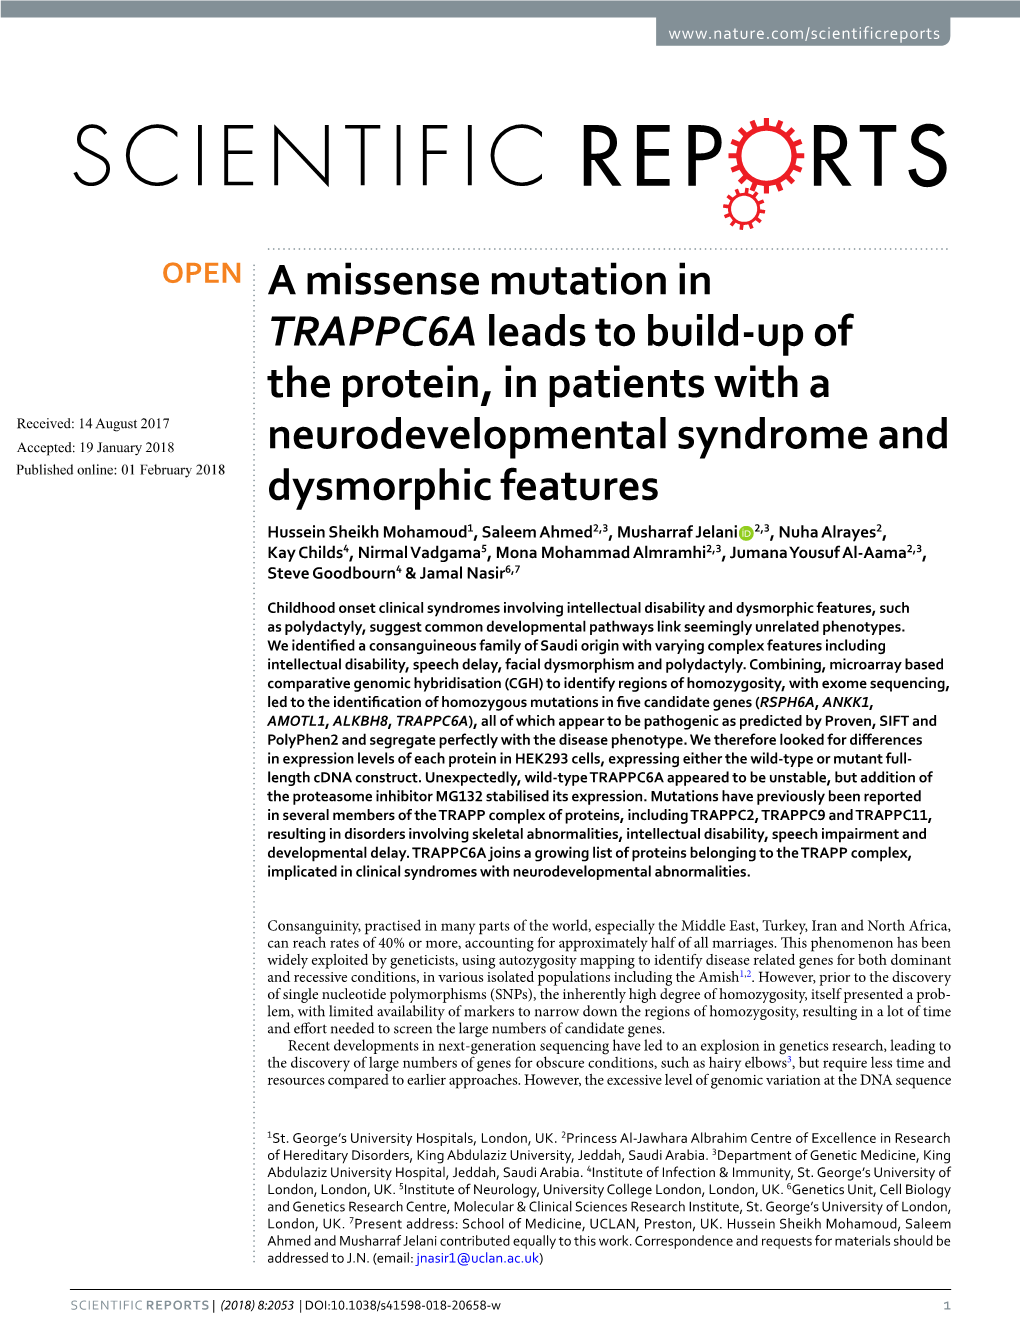 A Missense Mutation in TRAPPC6A Leads to Build-Up of the Protein, In